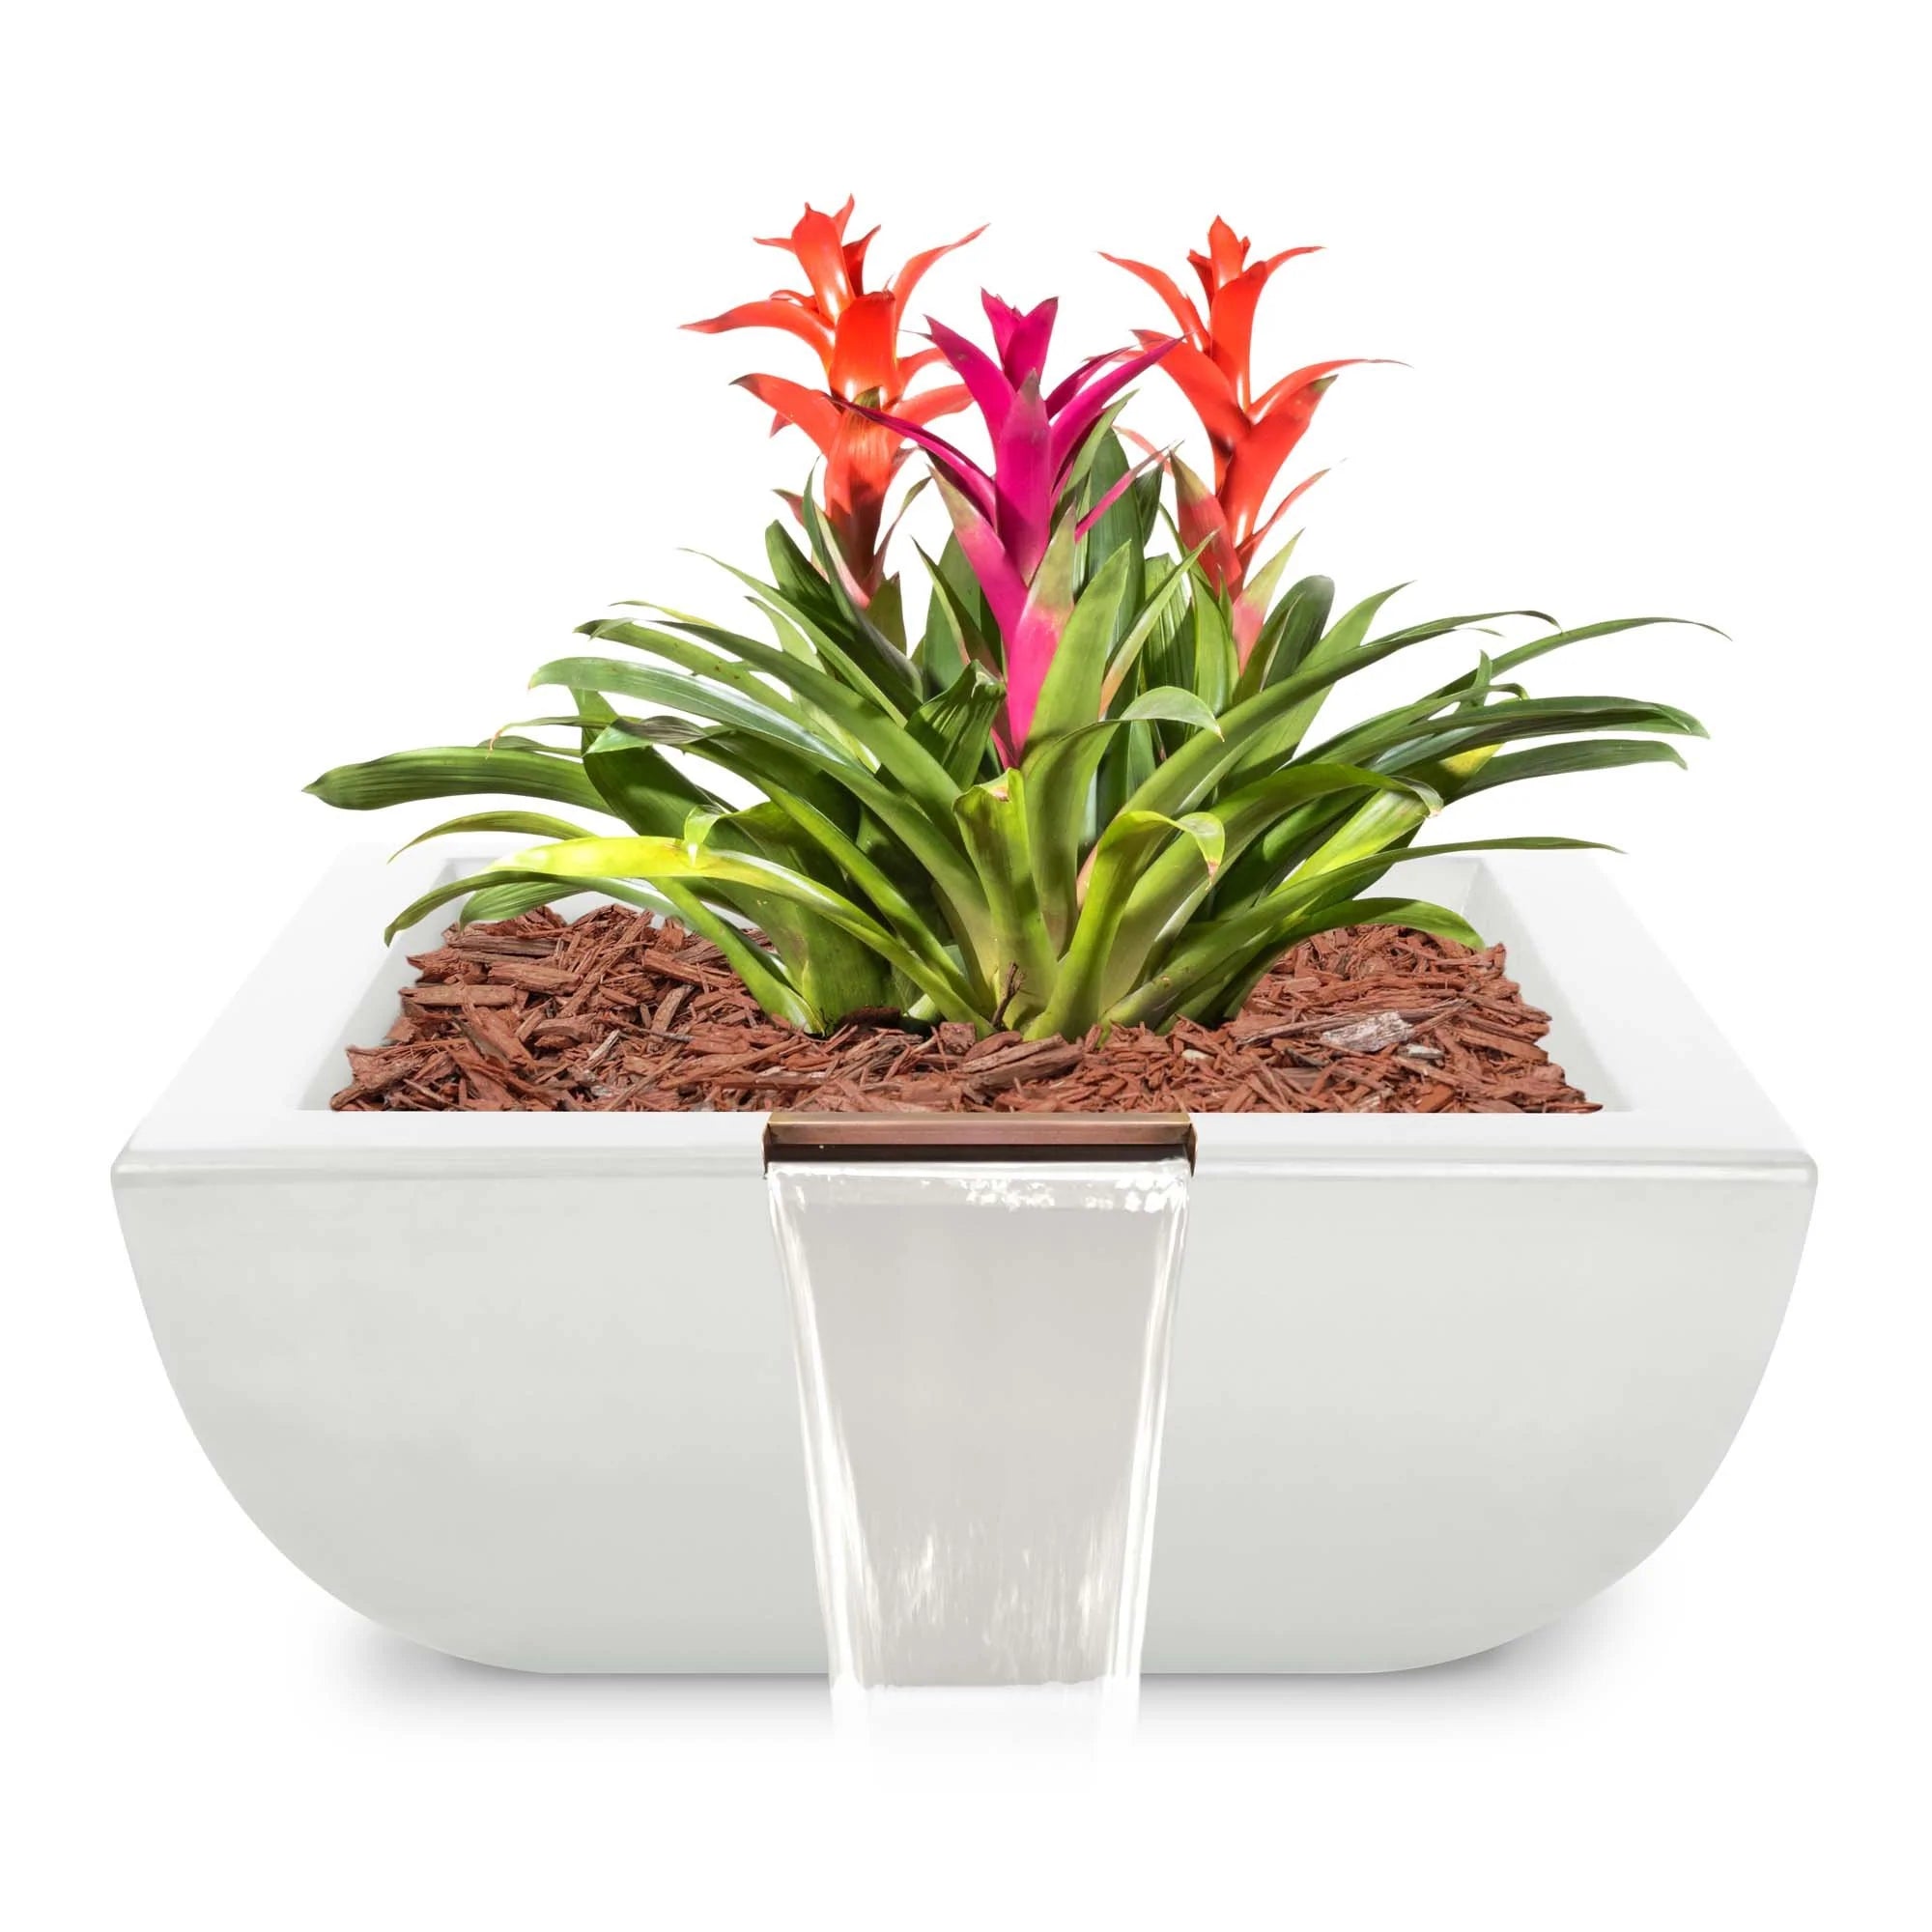 The Outdoor Plus Planter & Water Bowls